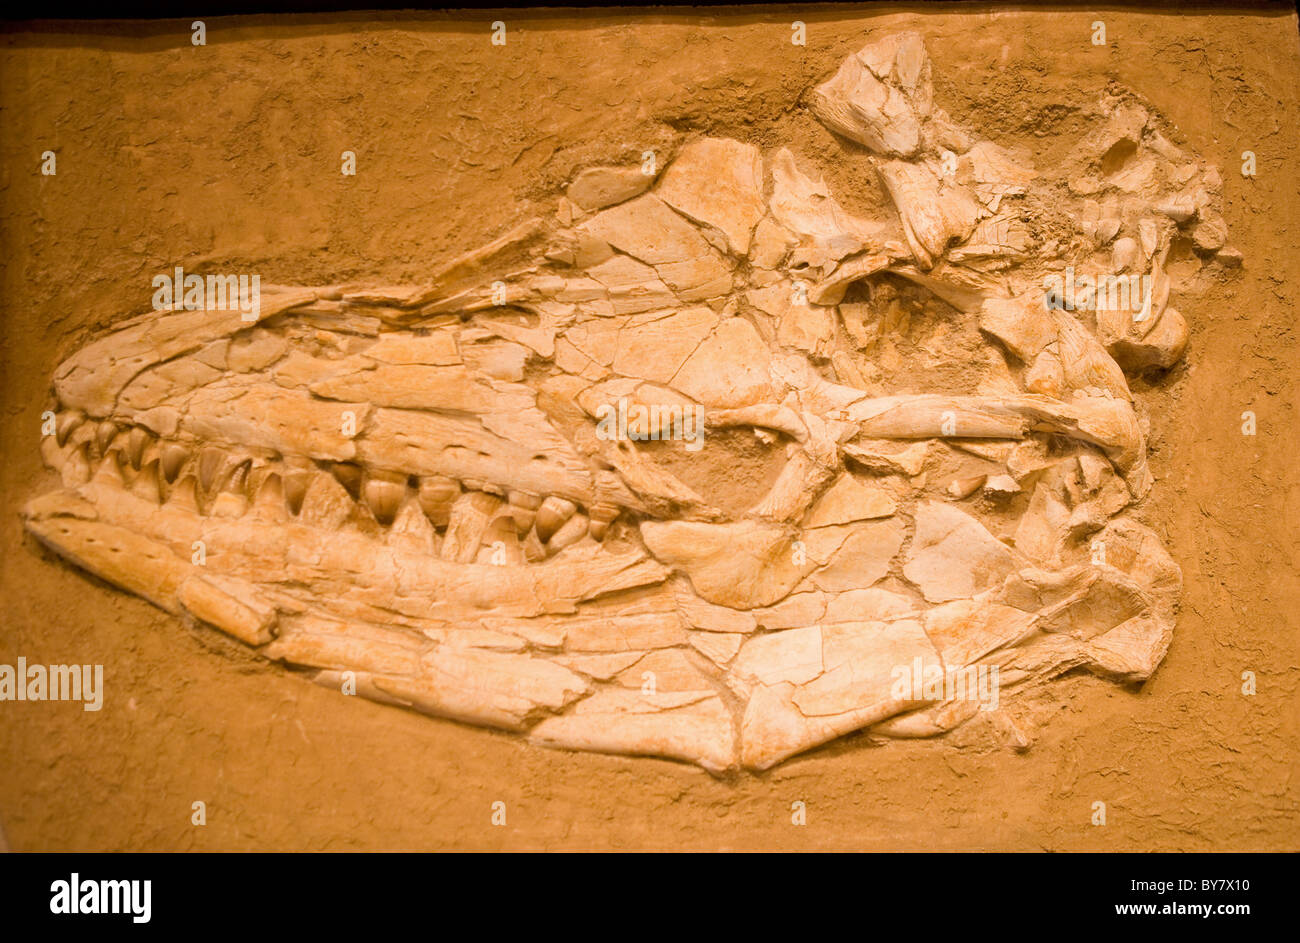 Large fossil of a mosasaur dinosaur marine reptile head from the Cretaceous Period Stock Photo